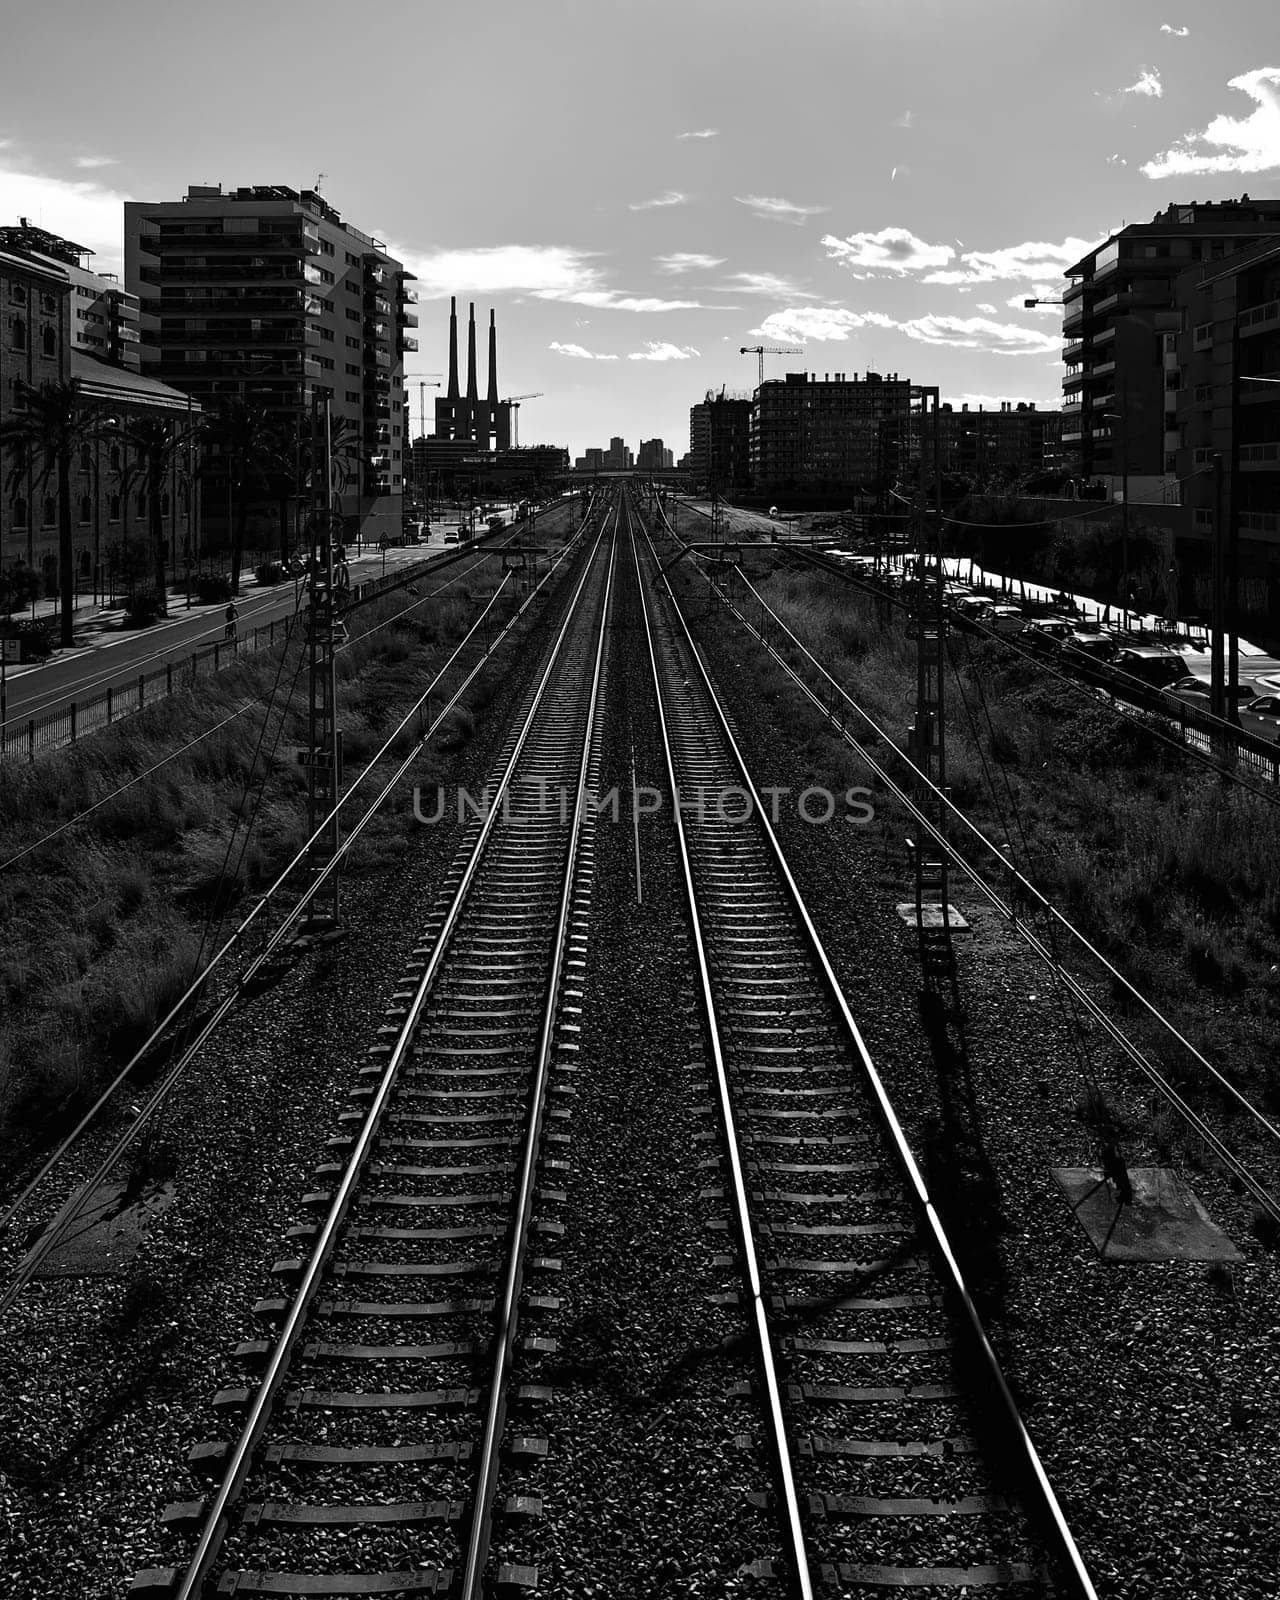 Railway tracks leading through urban landscape in black and white by apavlin